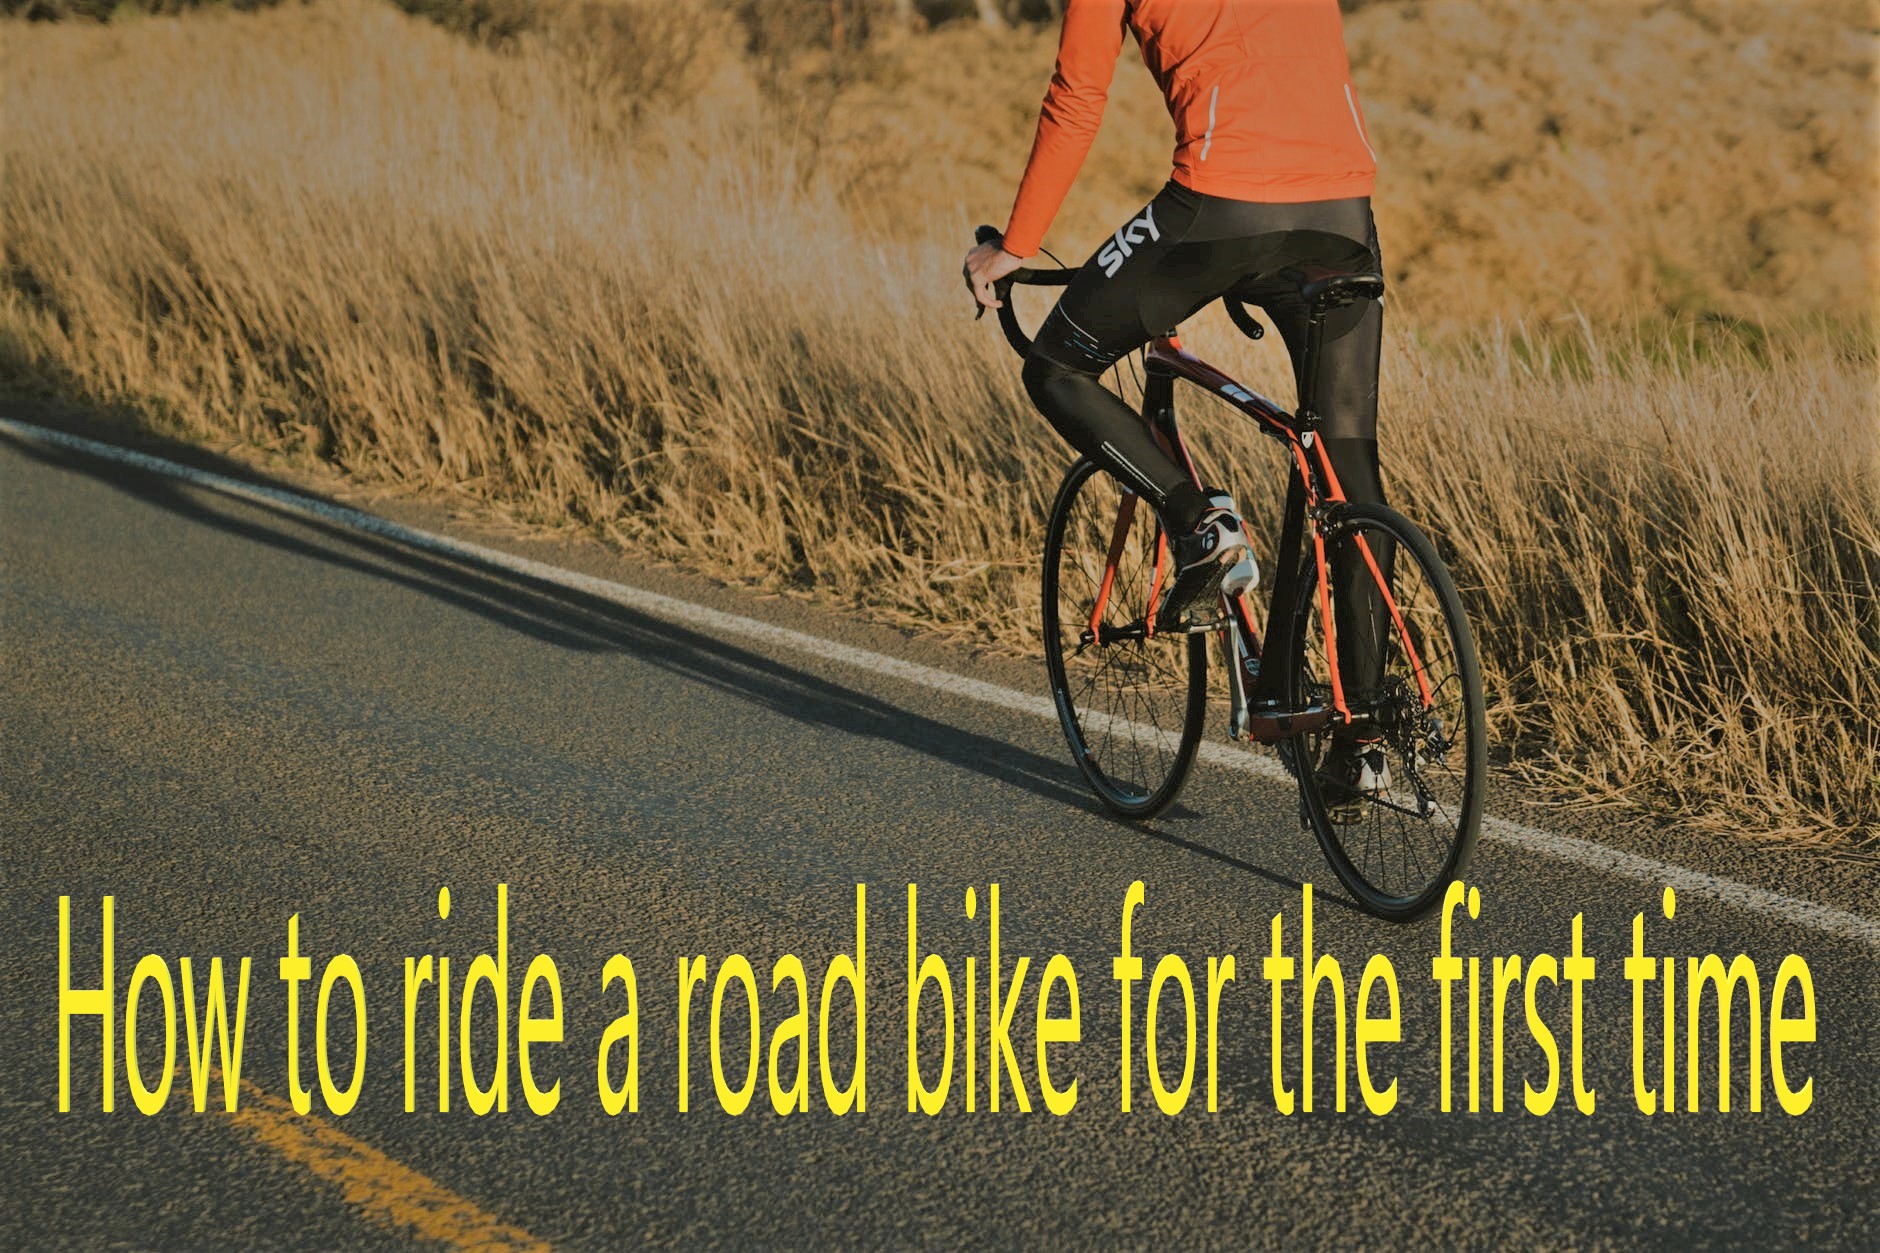 how to ride a road bike for the first time